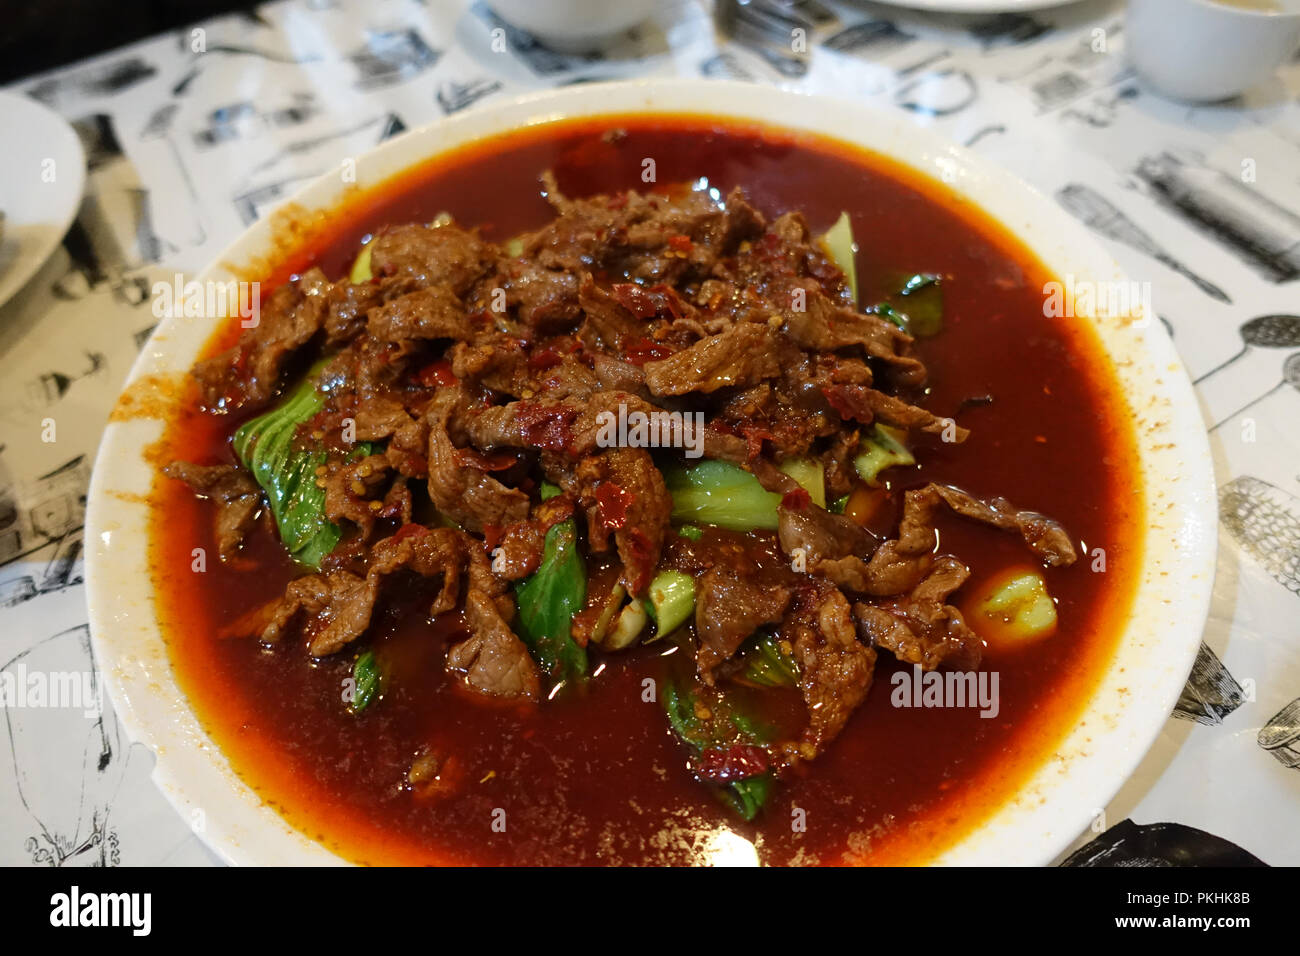 Stir fry meat with bok choi Stock Photo